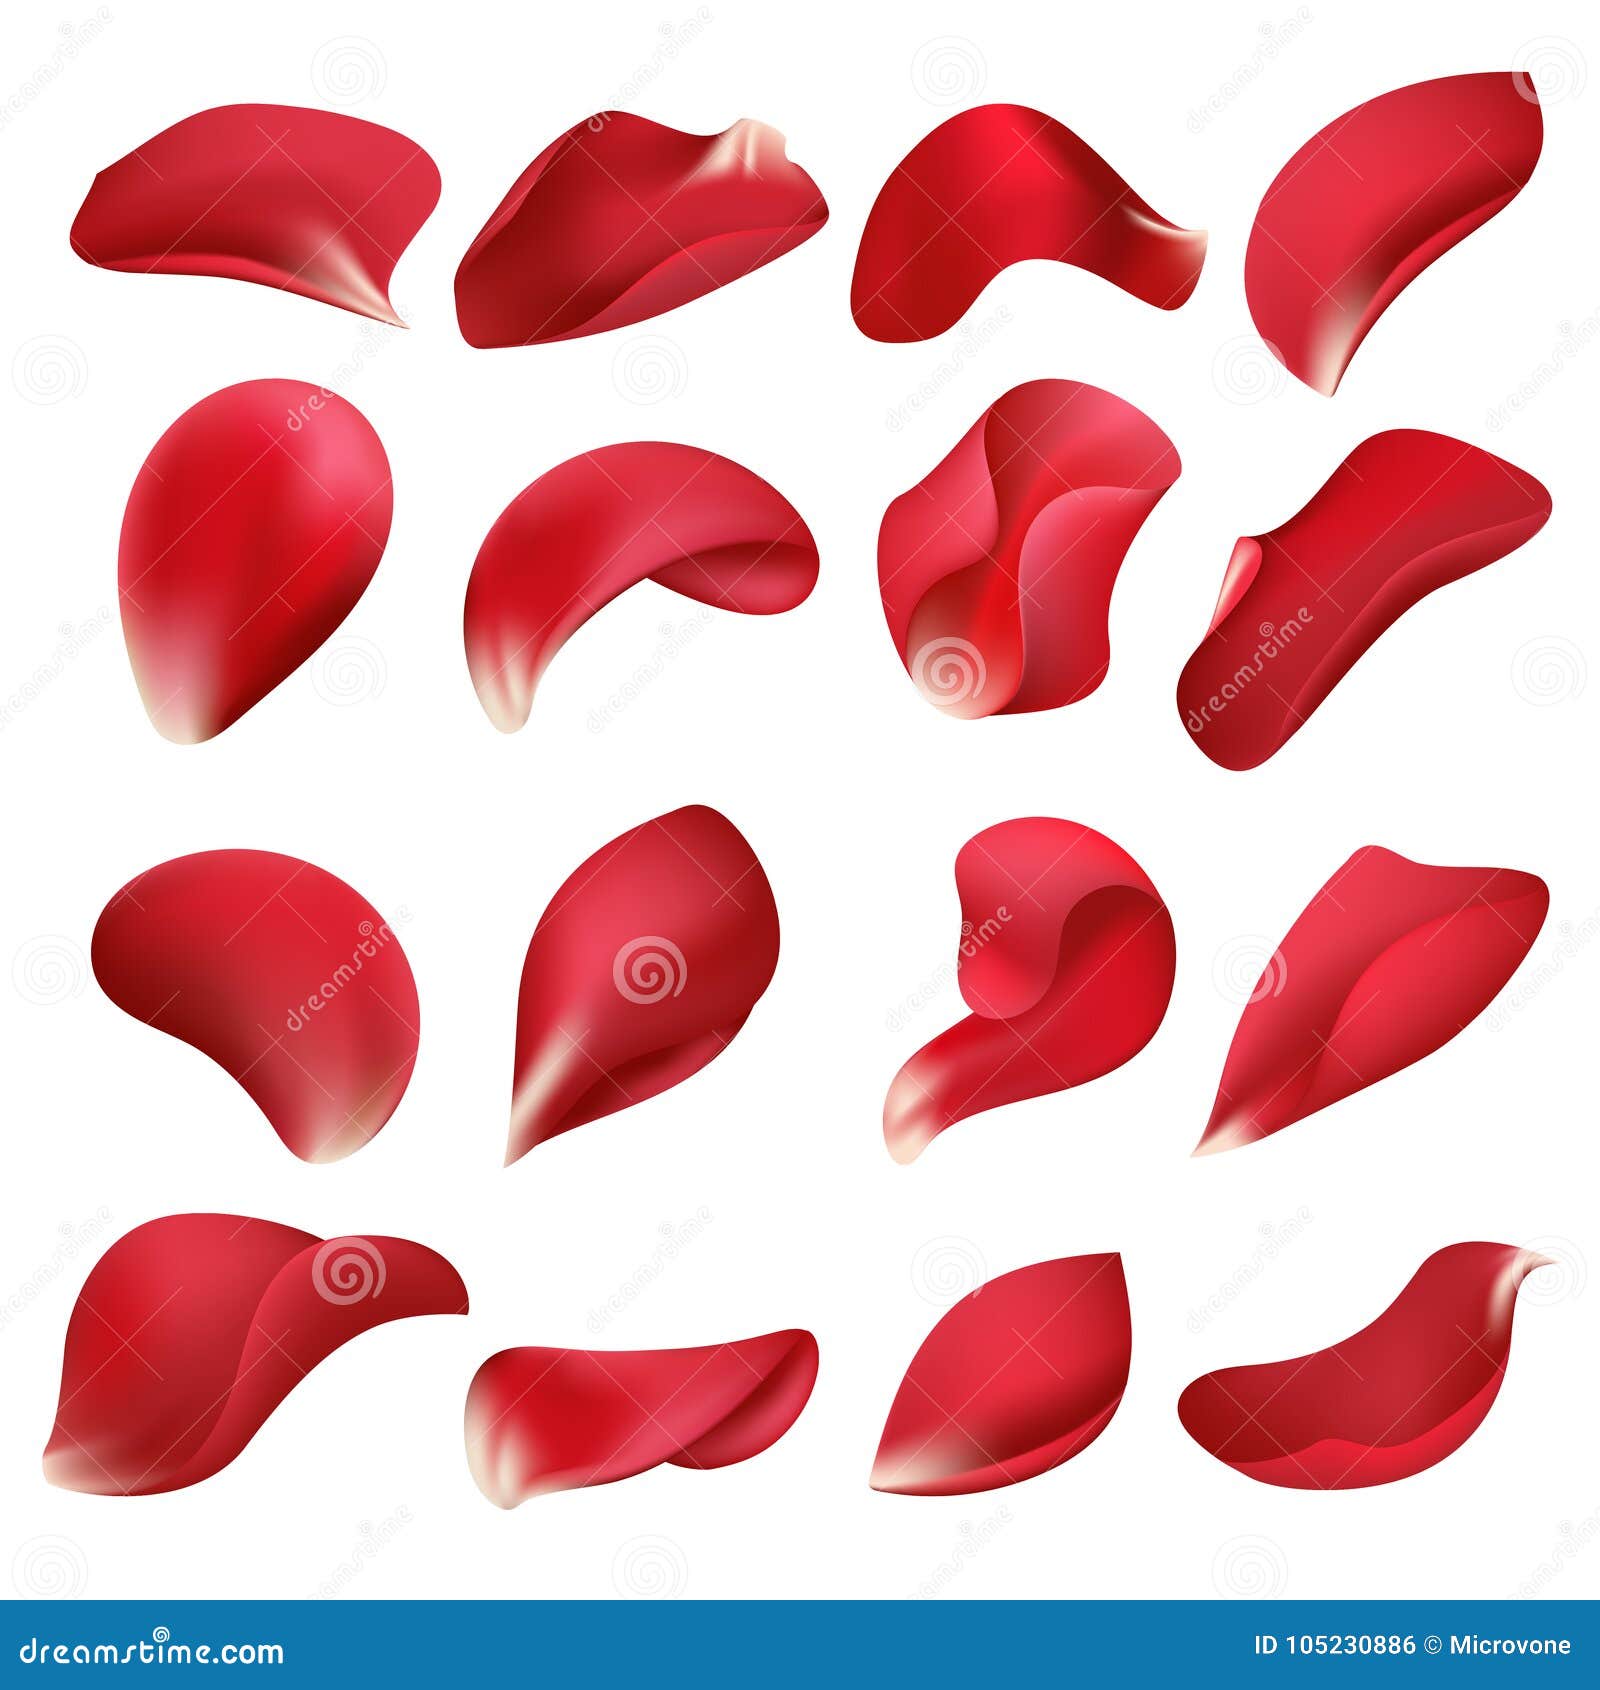 realistic red rose flower petals  on white background  set